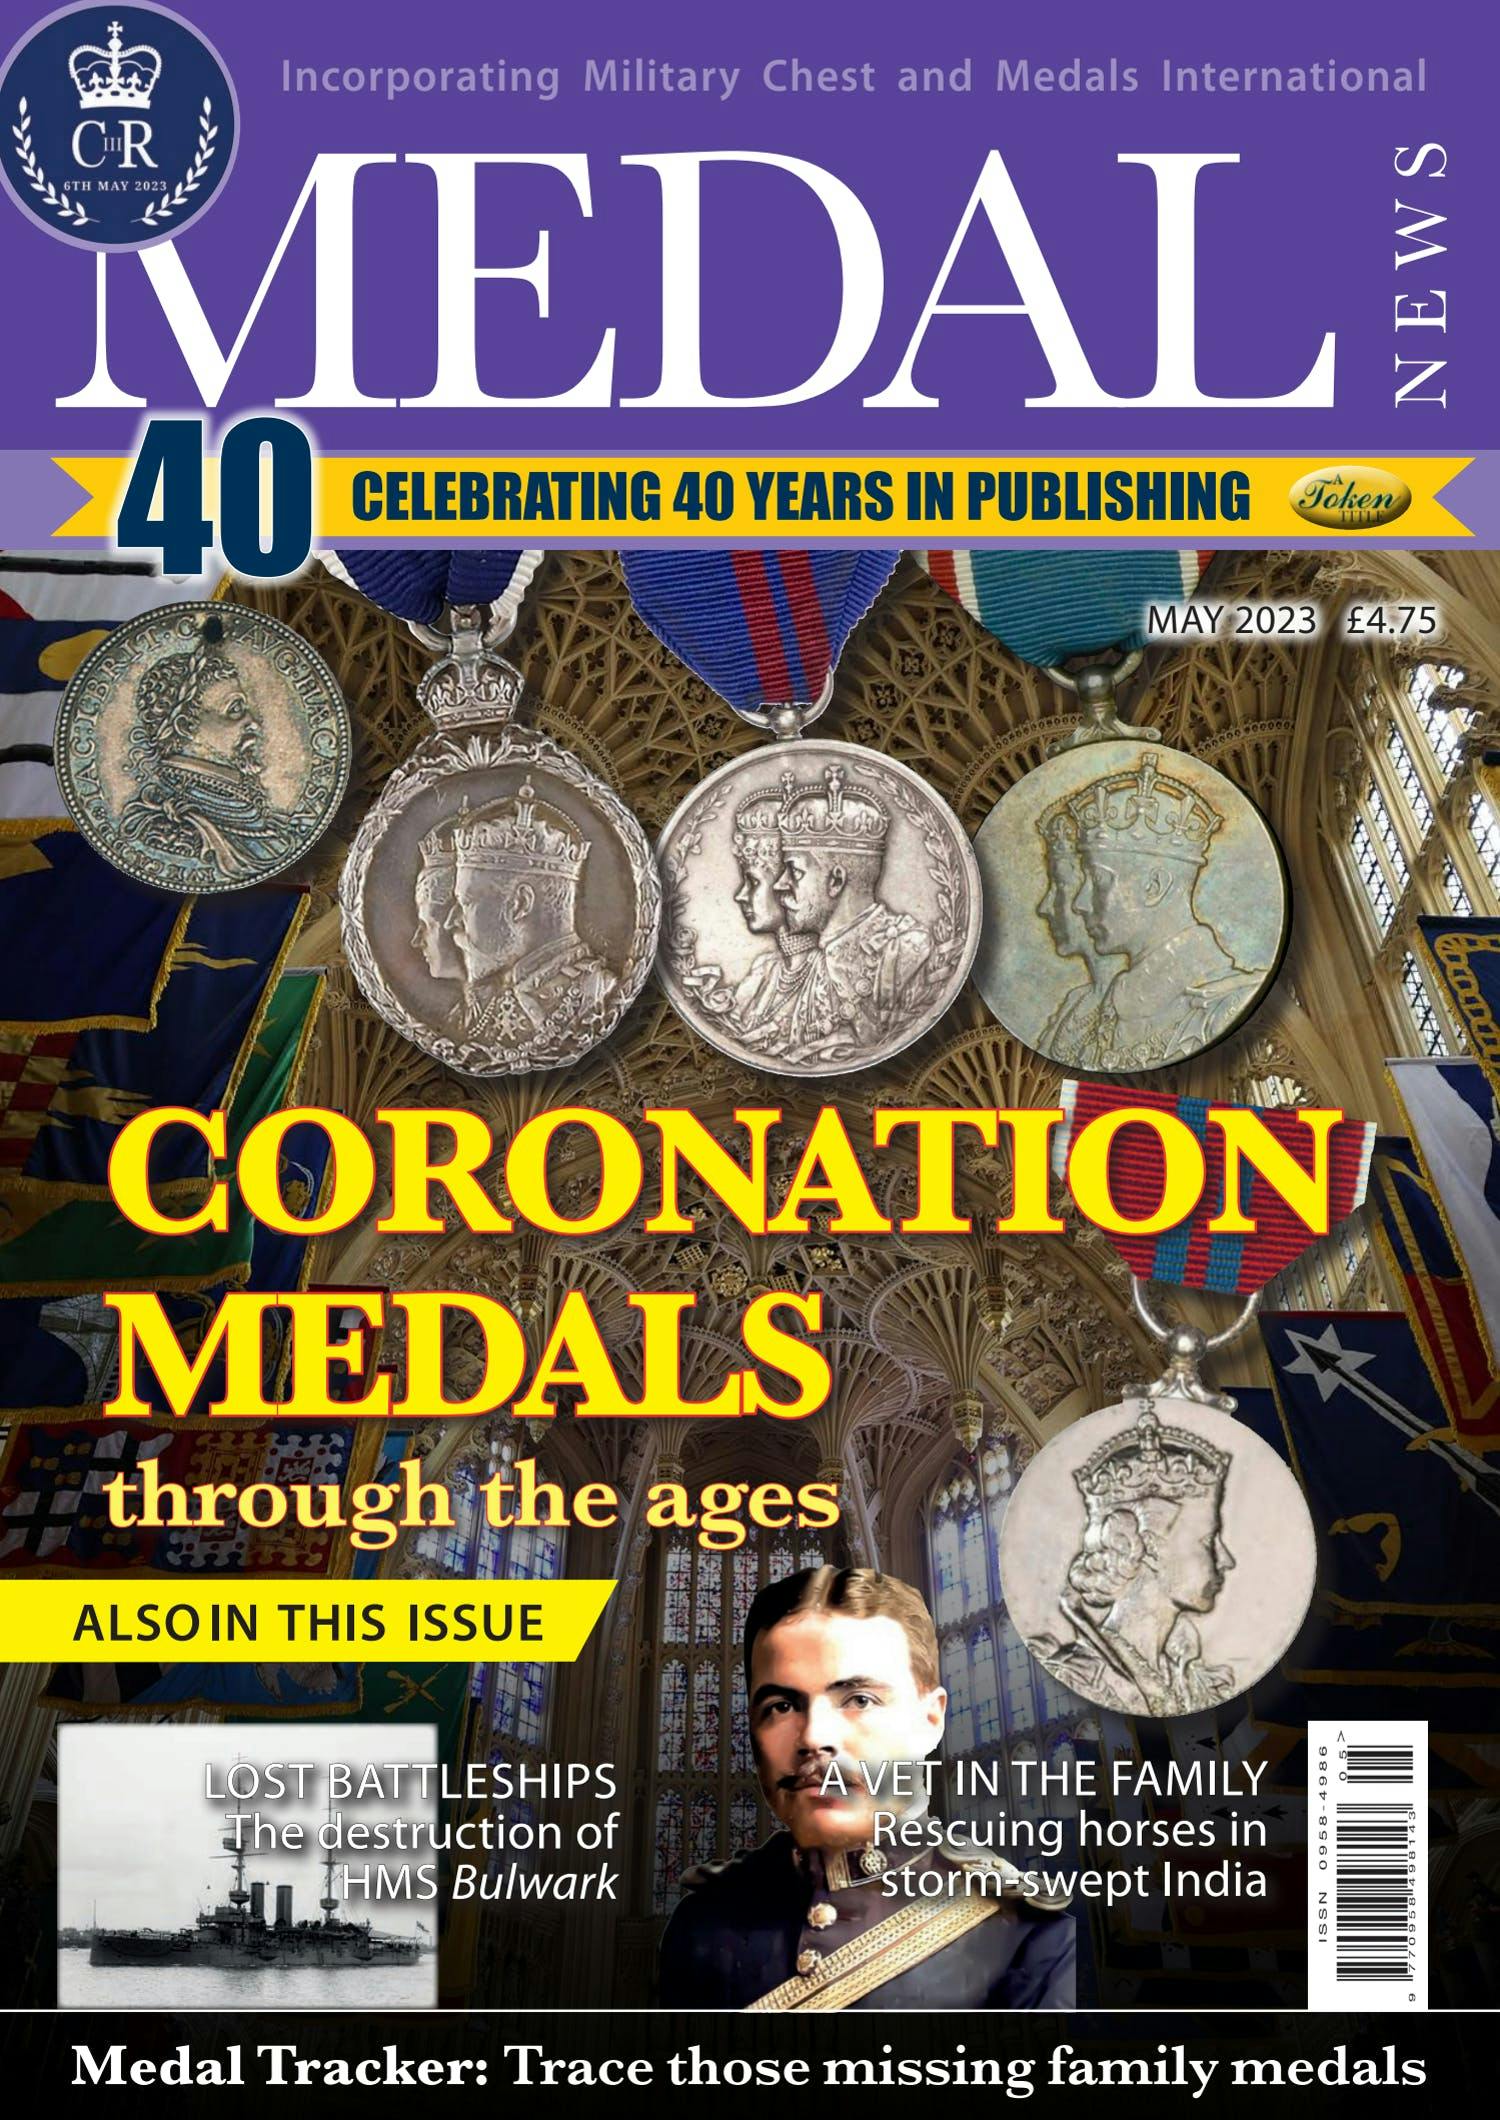 The front cover of Medal News, Volume 61, Number 5, May 2023